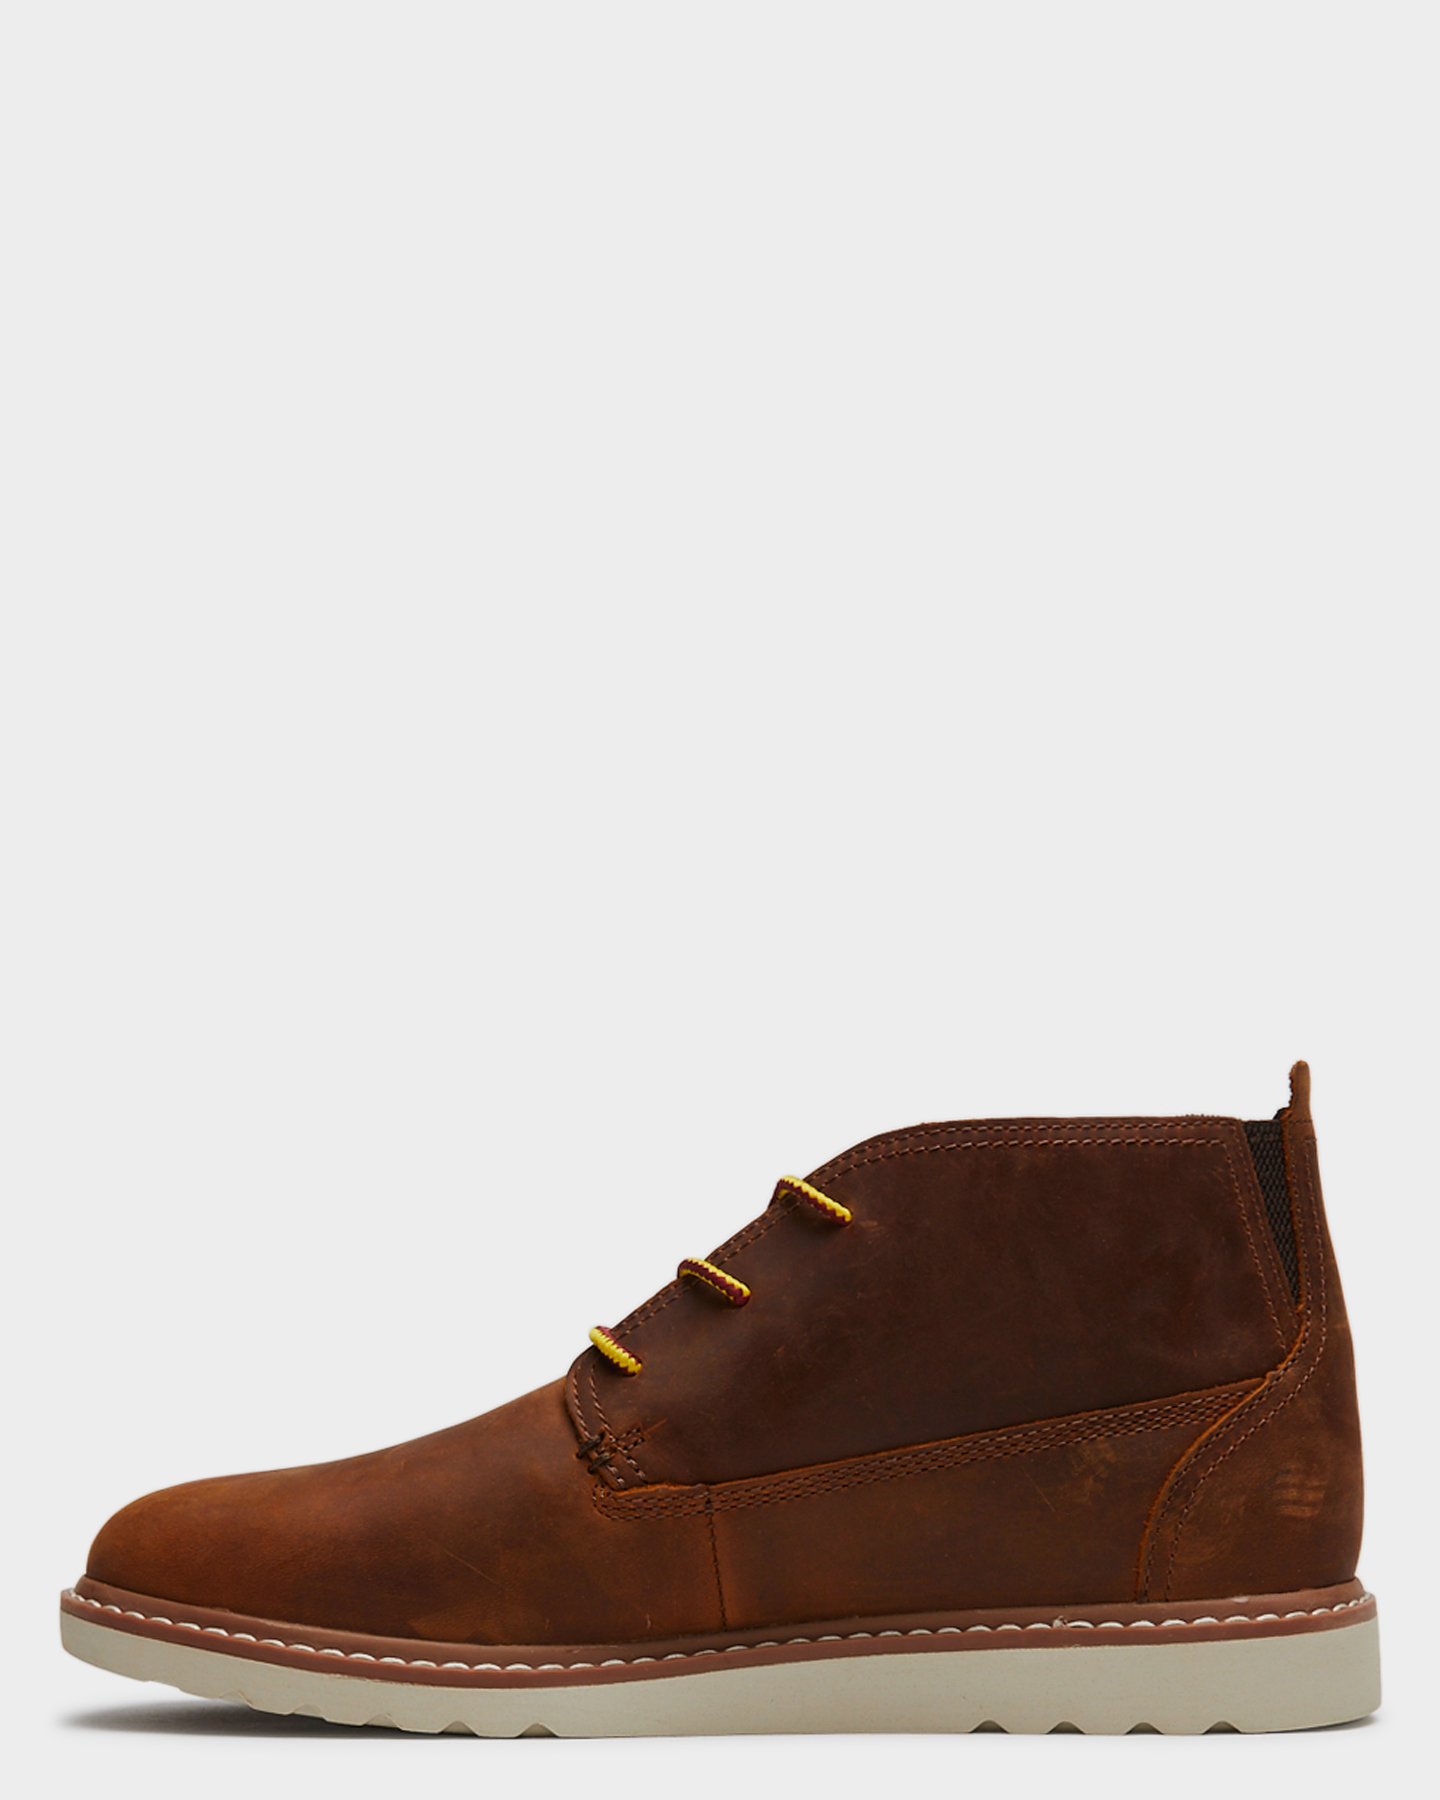 Reef Mens Voyage Leather Boot - Brown | SurfStitch